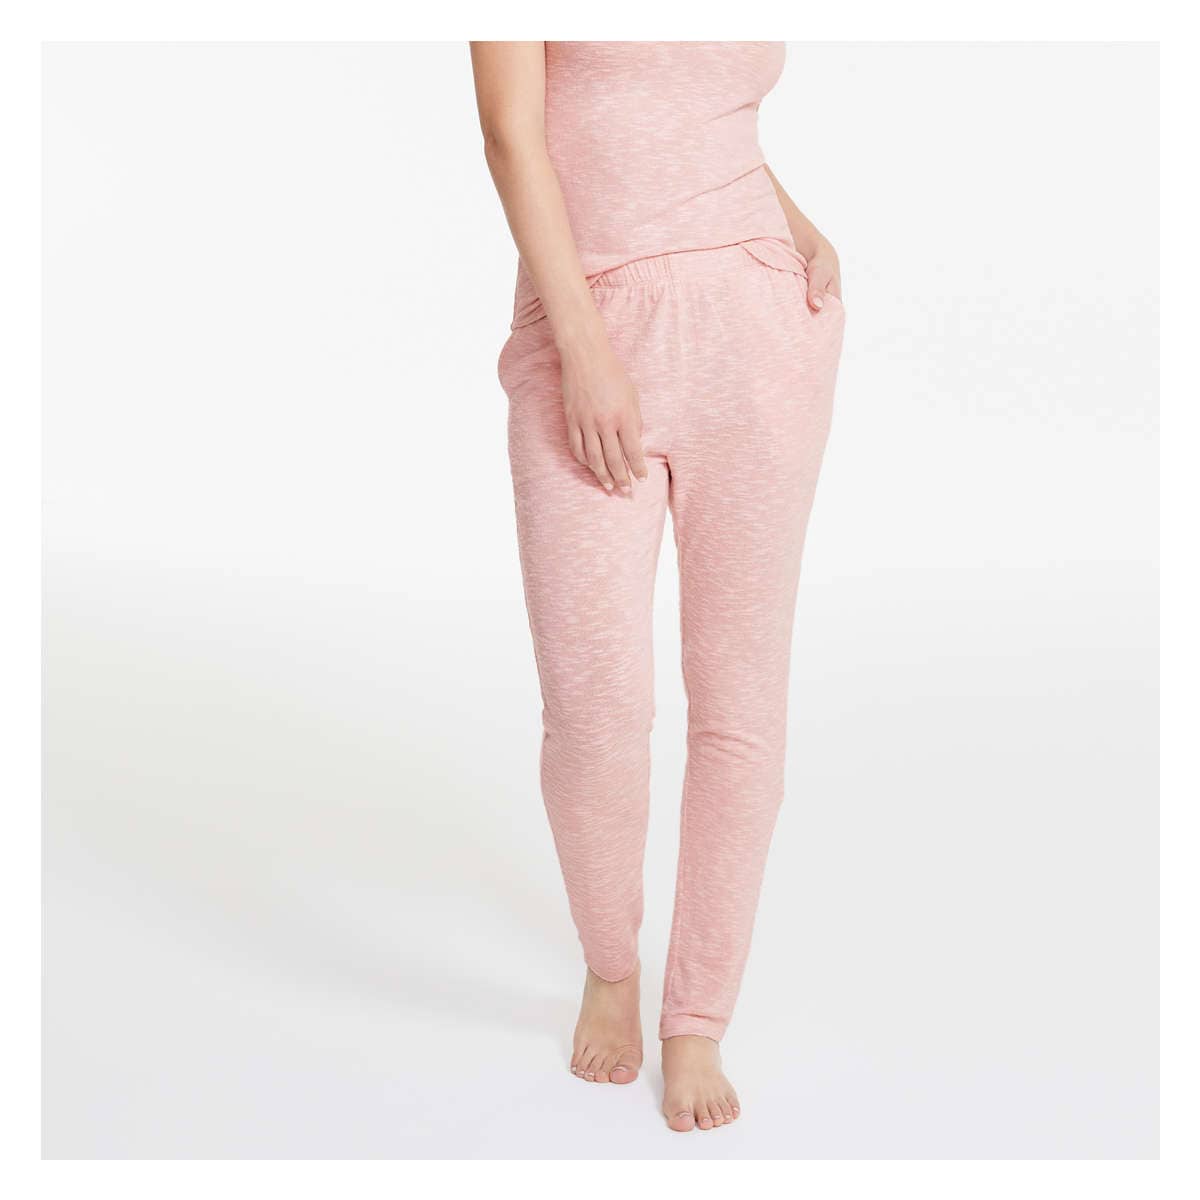 Soft Knit Sleep Pant in Pale Pink from Joe Fresh